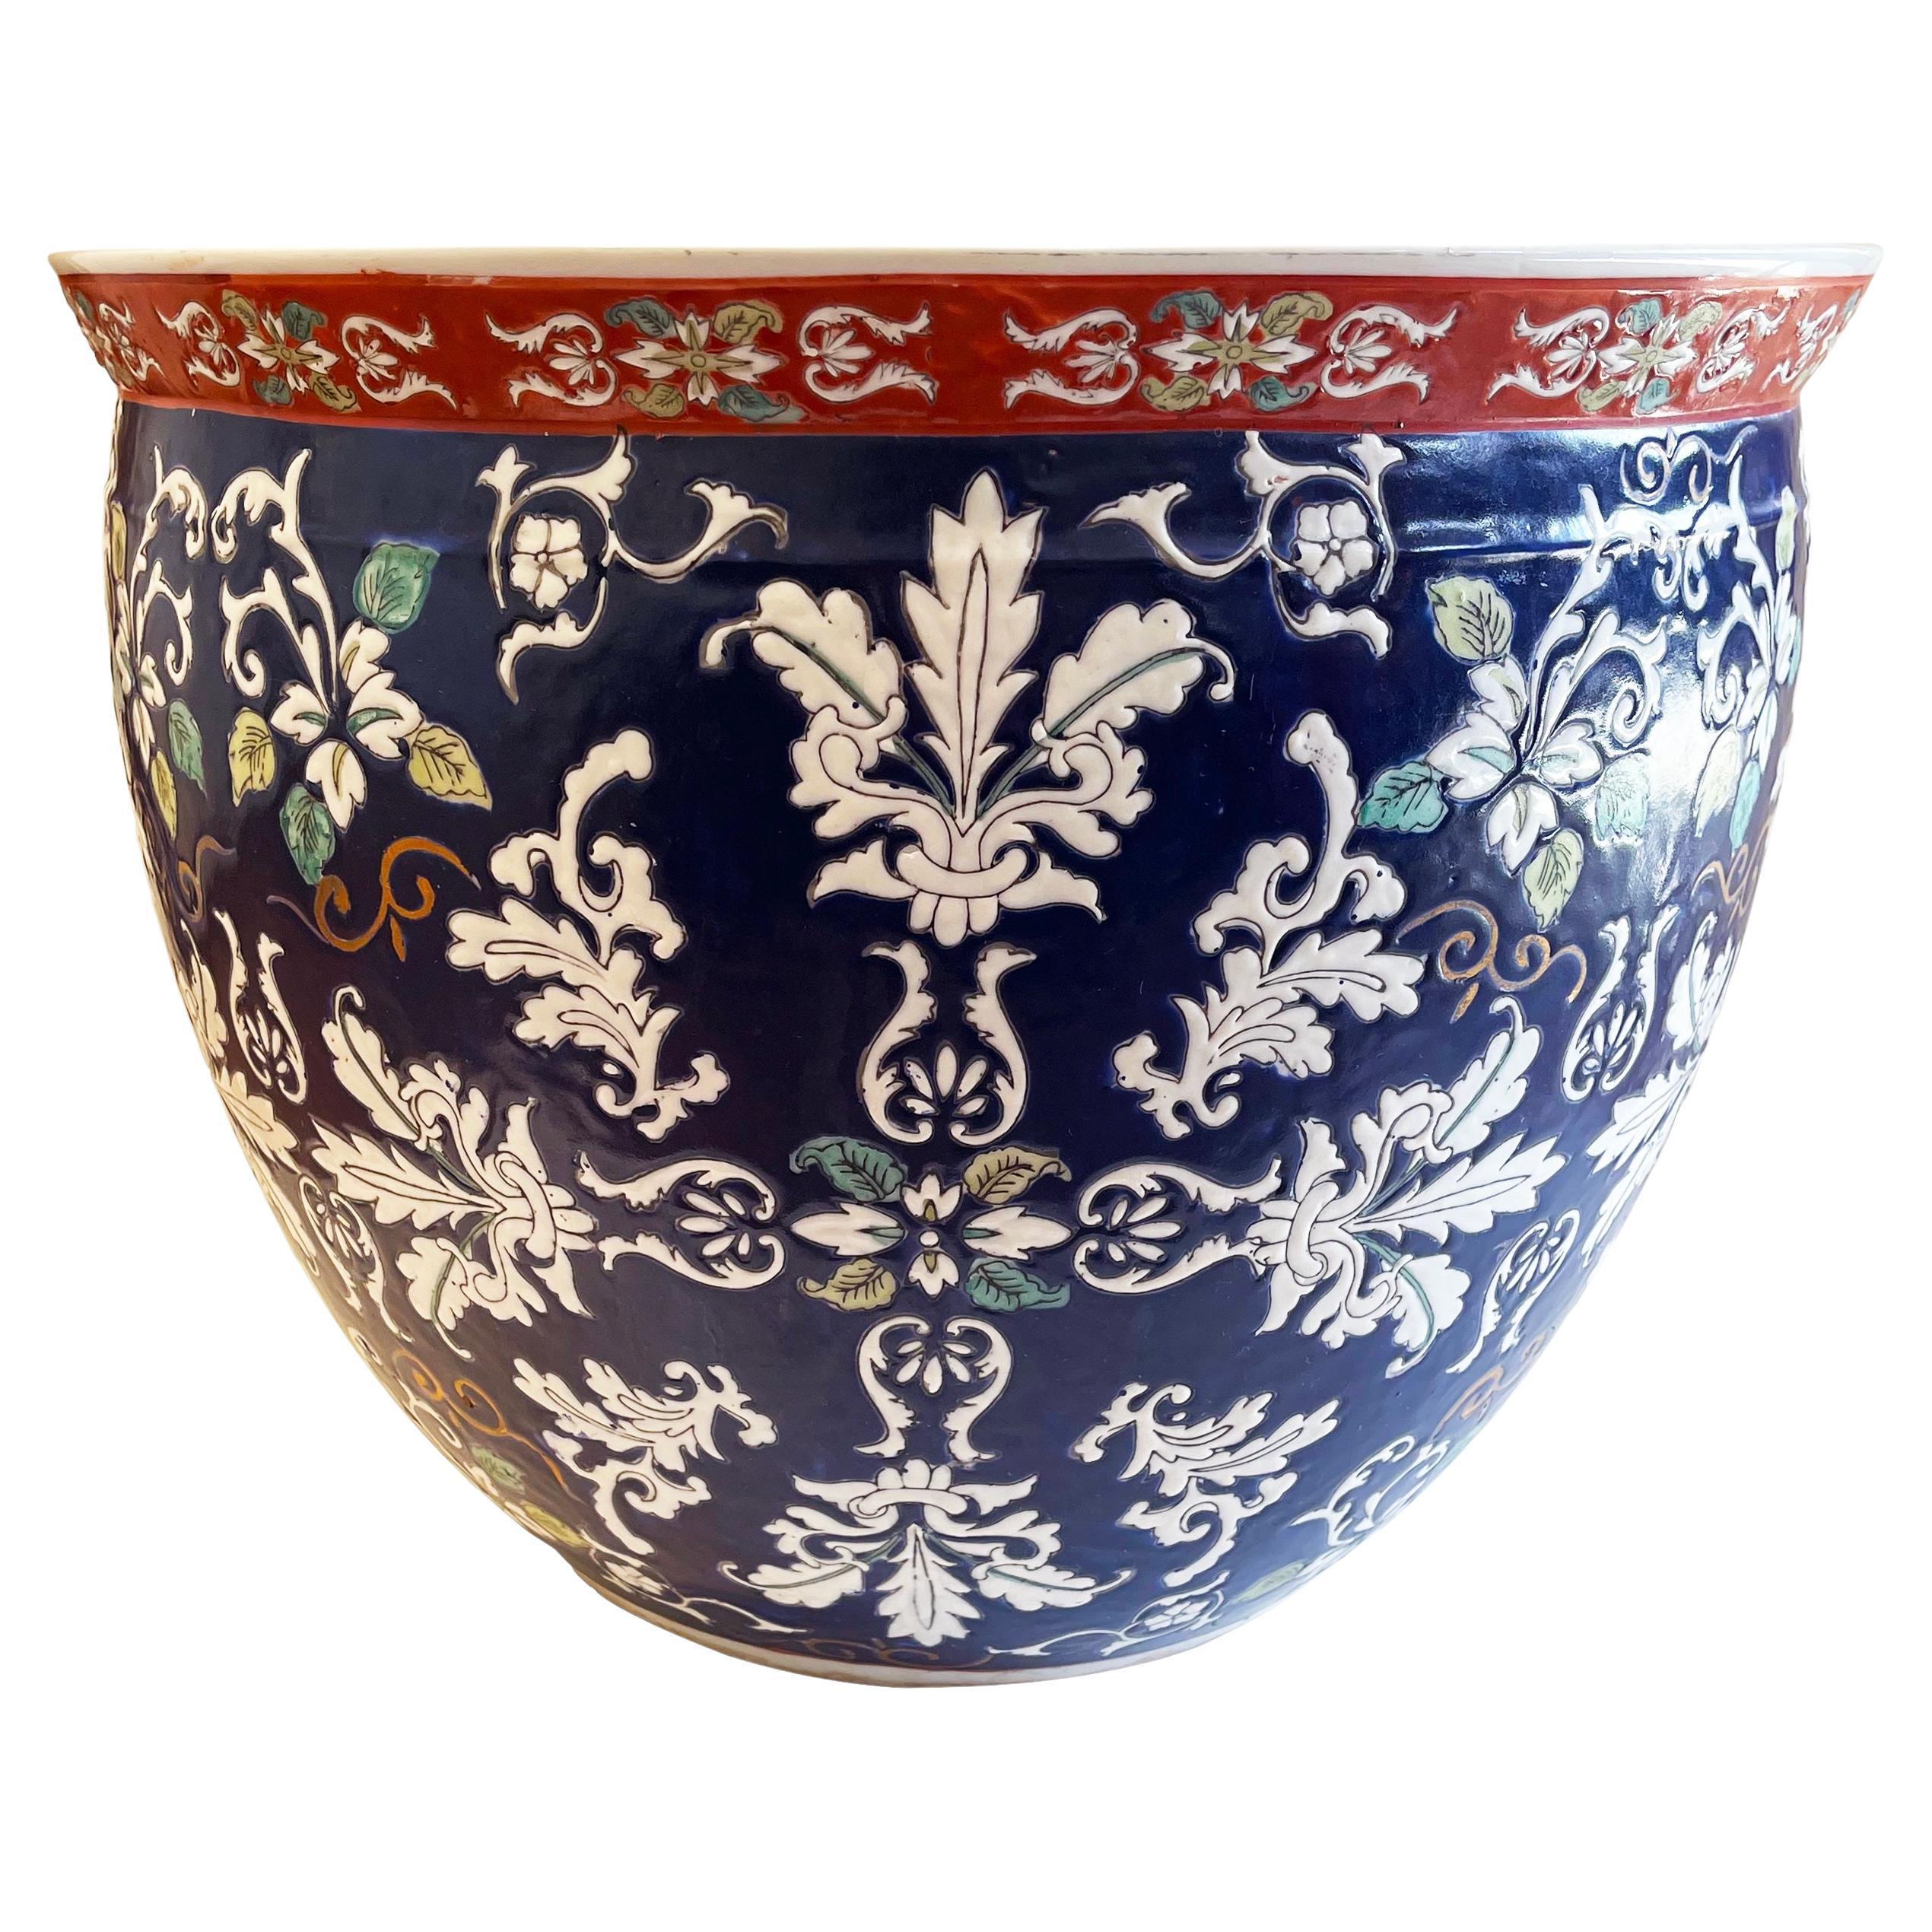 Beautifully decorated Chinese Export porcelain Jardiniere (Cachepot) or Fish Bowl, hand decorated in a Famille-Rose pattern and dating to the mid-20th century.
The Pattern is also slightly  inspired by the French baroque style.

This piece is